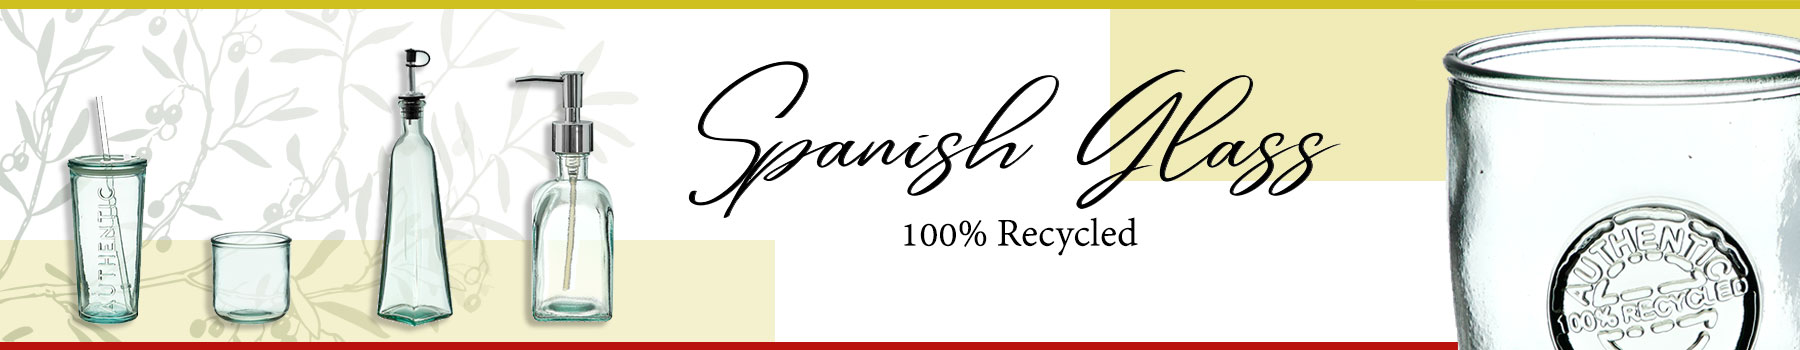 Spanish Glass is 100 percent recycled -ad with cruets, mugs authentic brand cup